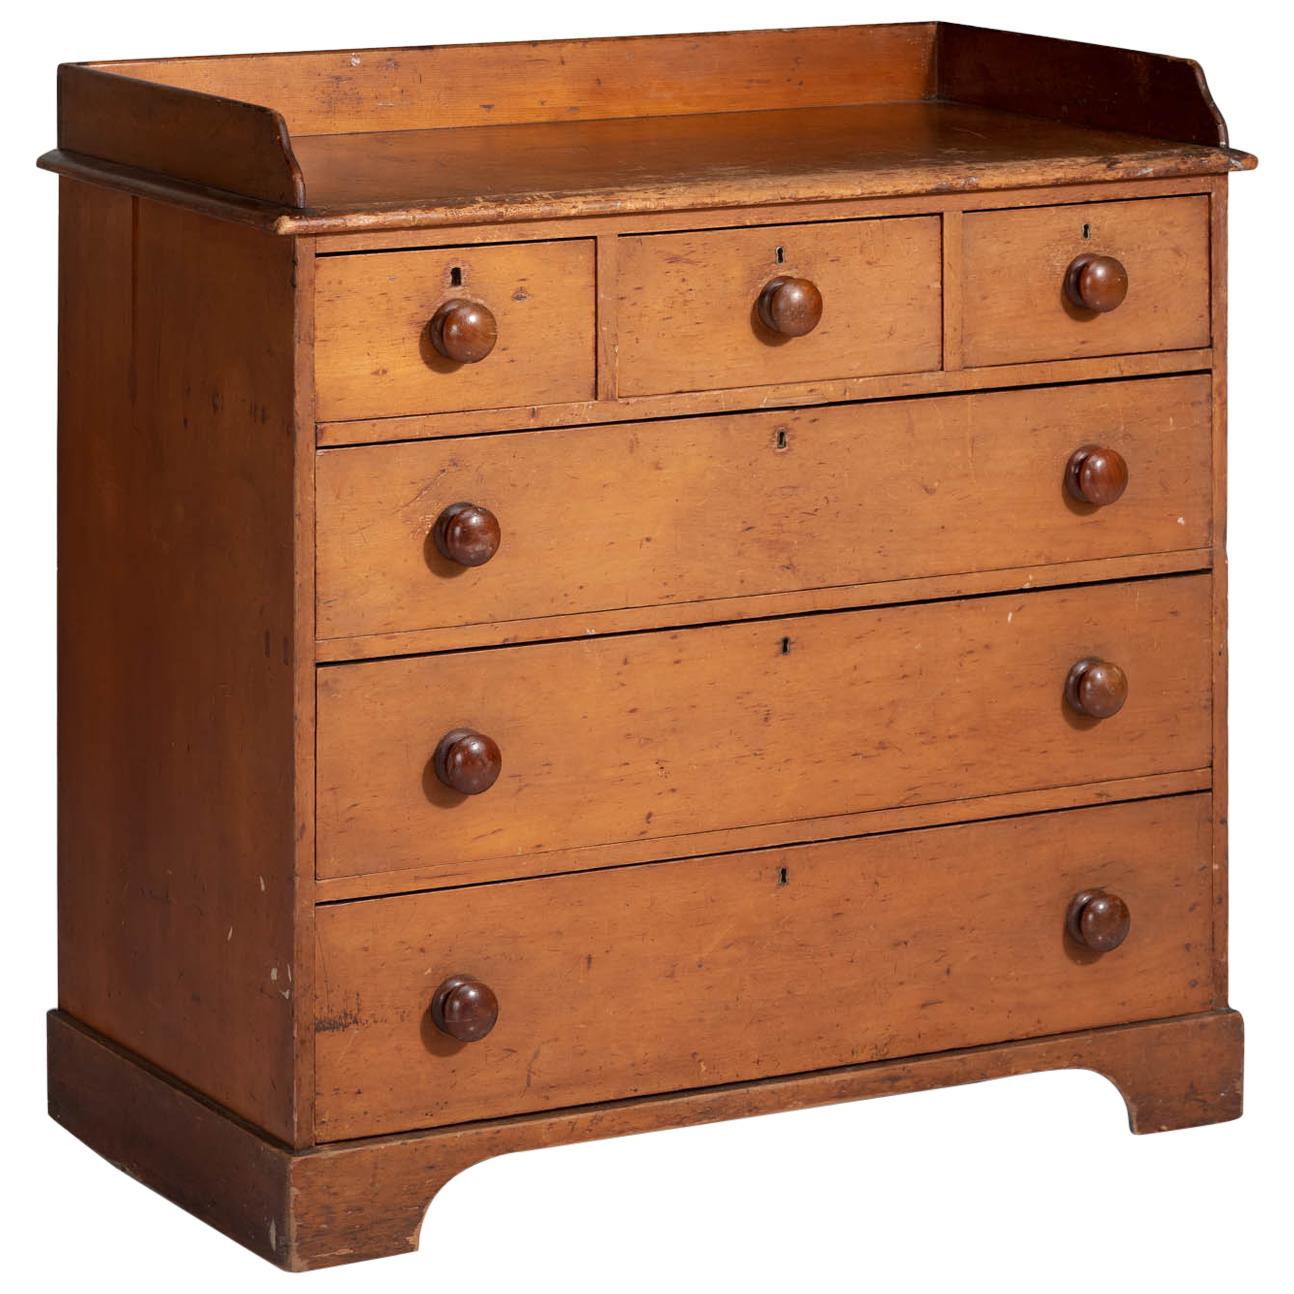 Pine Chest of Drawers, England, circa 1890